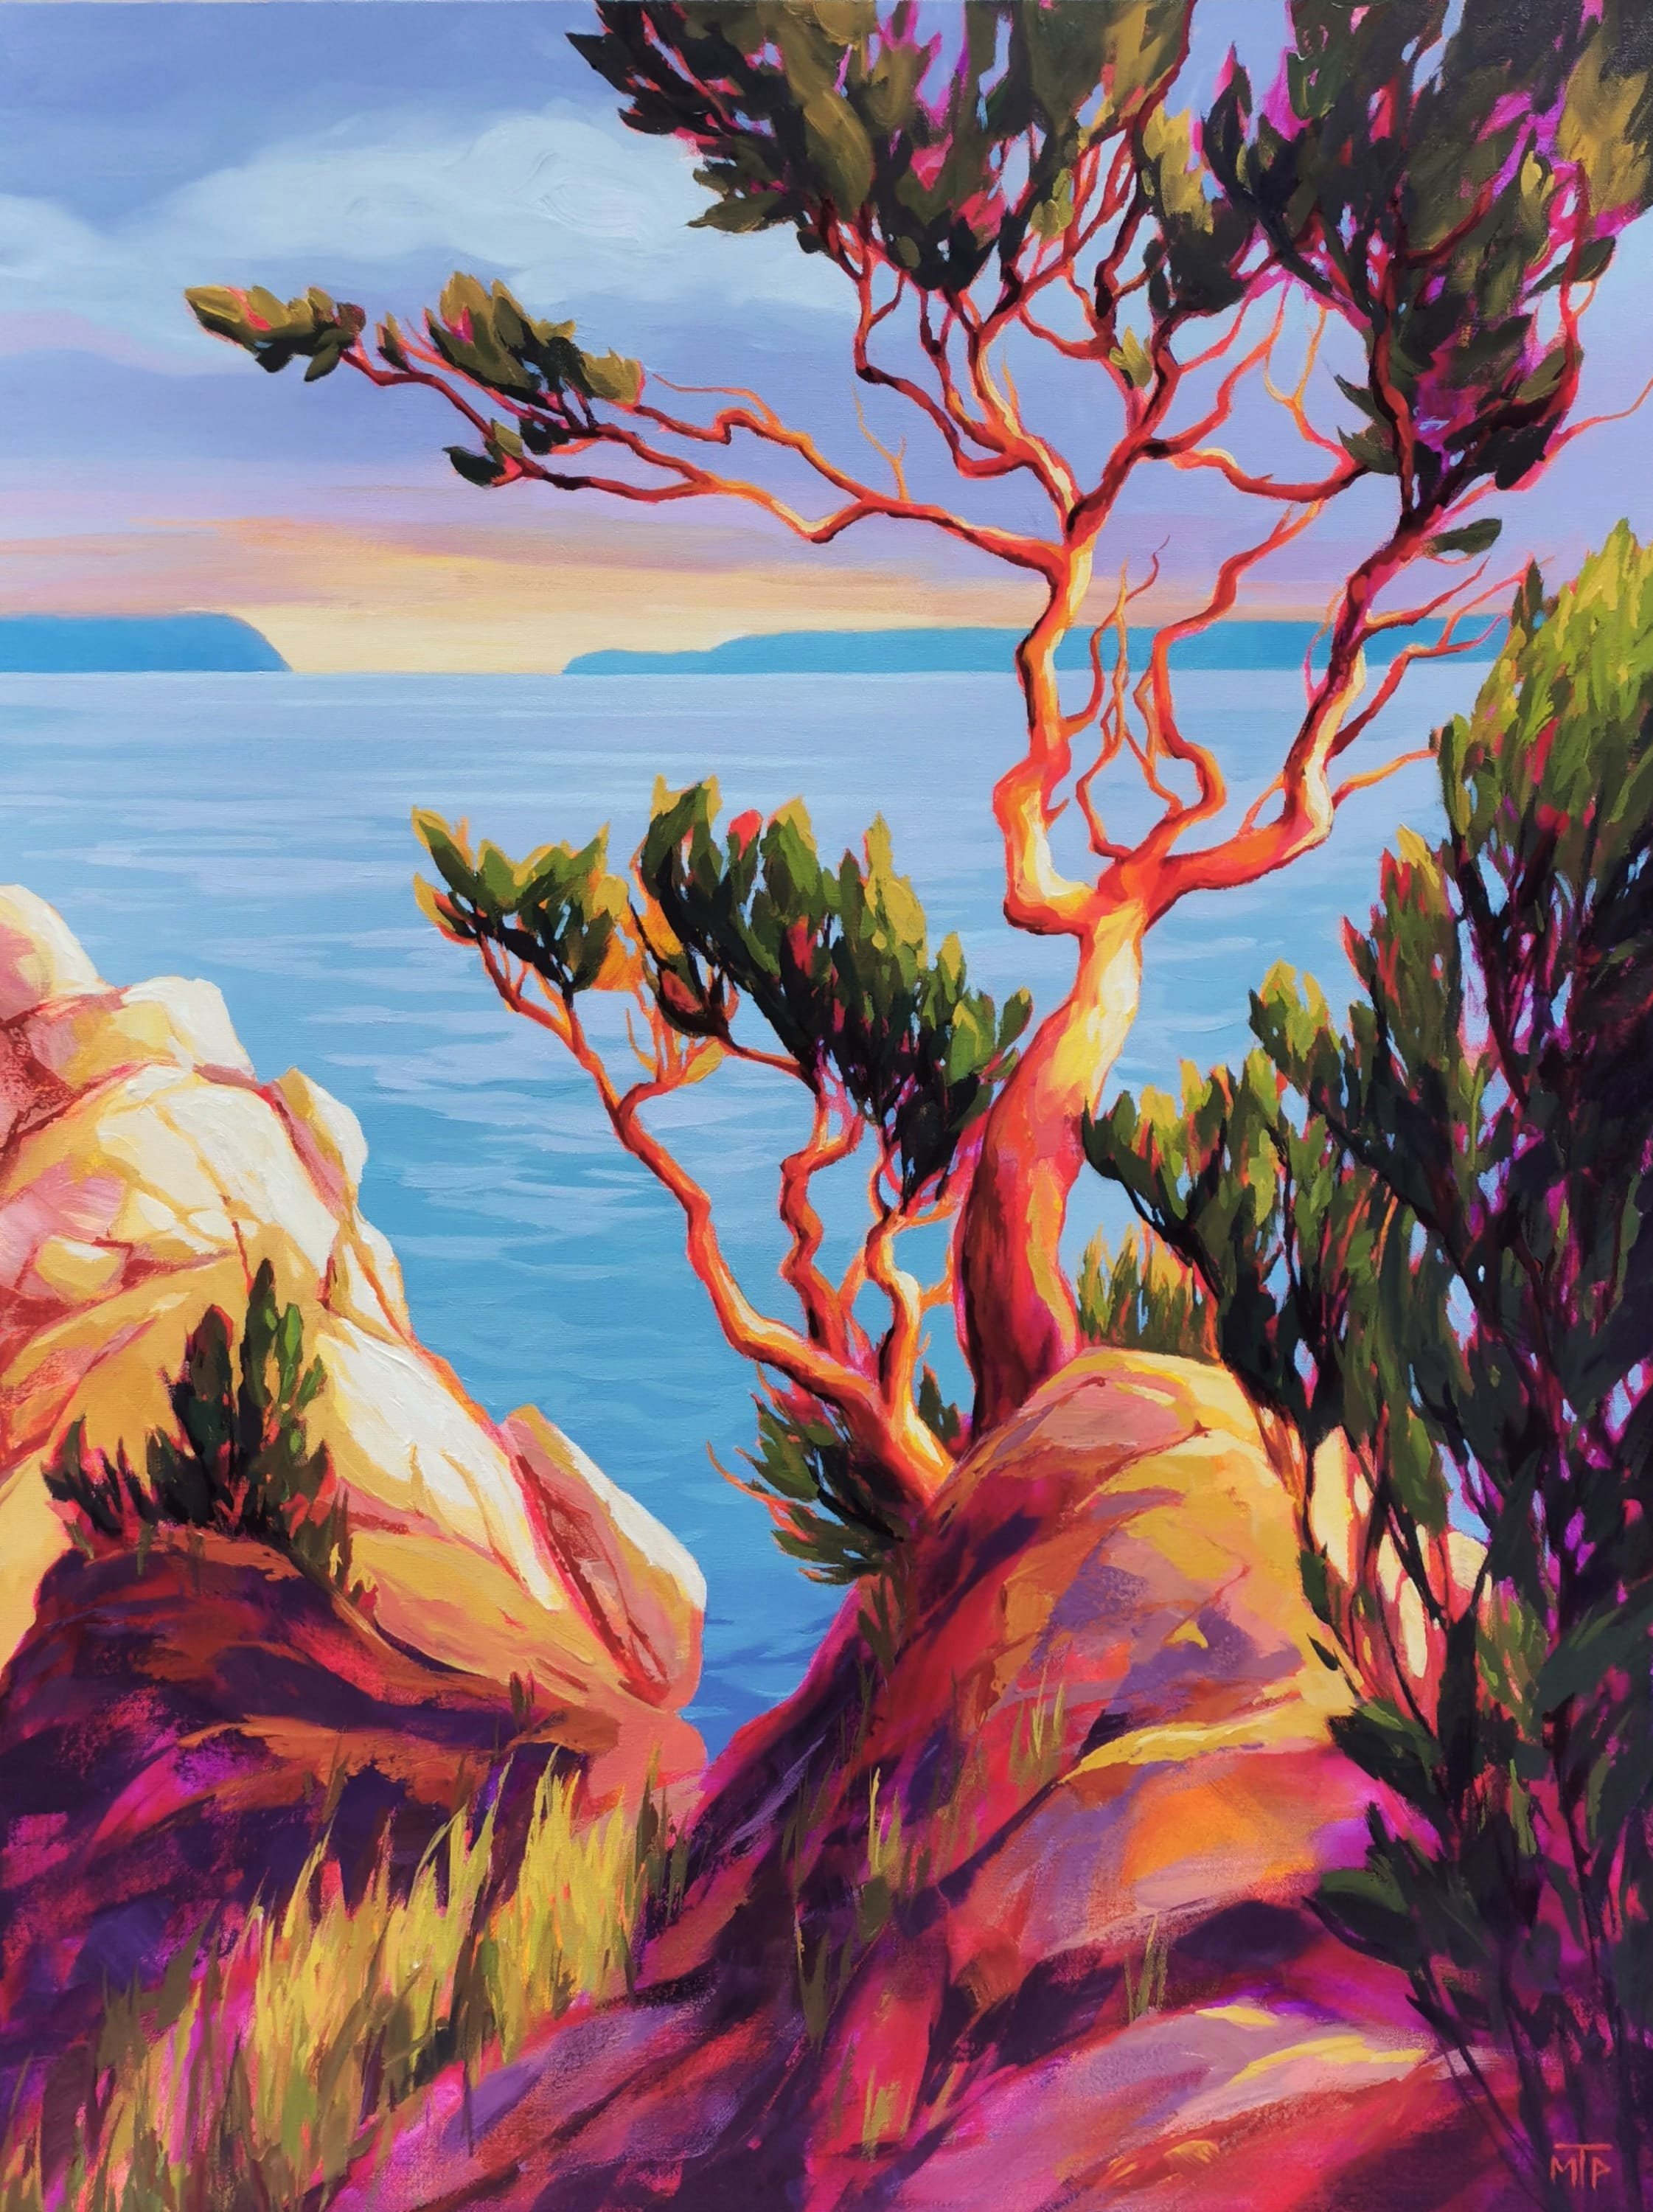  Arbutus Sunset   Acrylic on canvas, 40x30 inches, $3600  